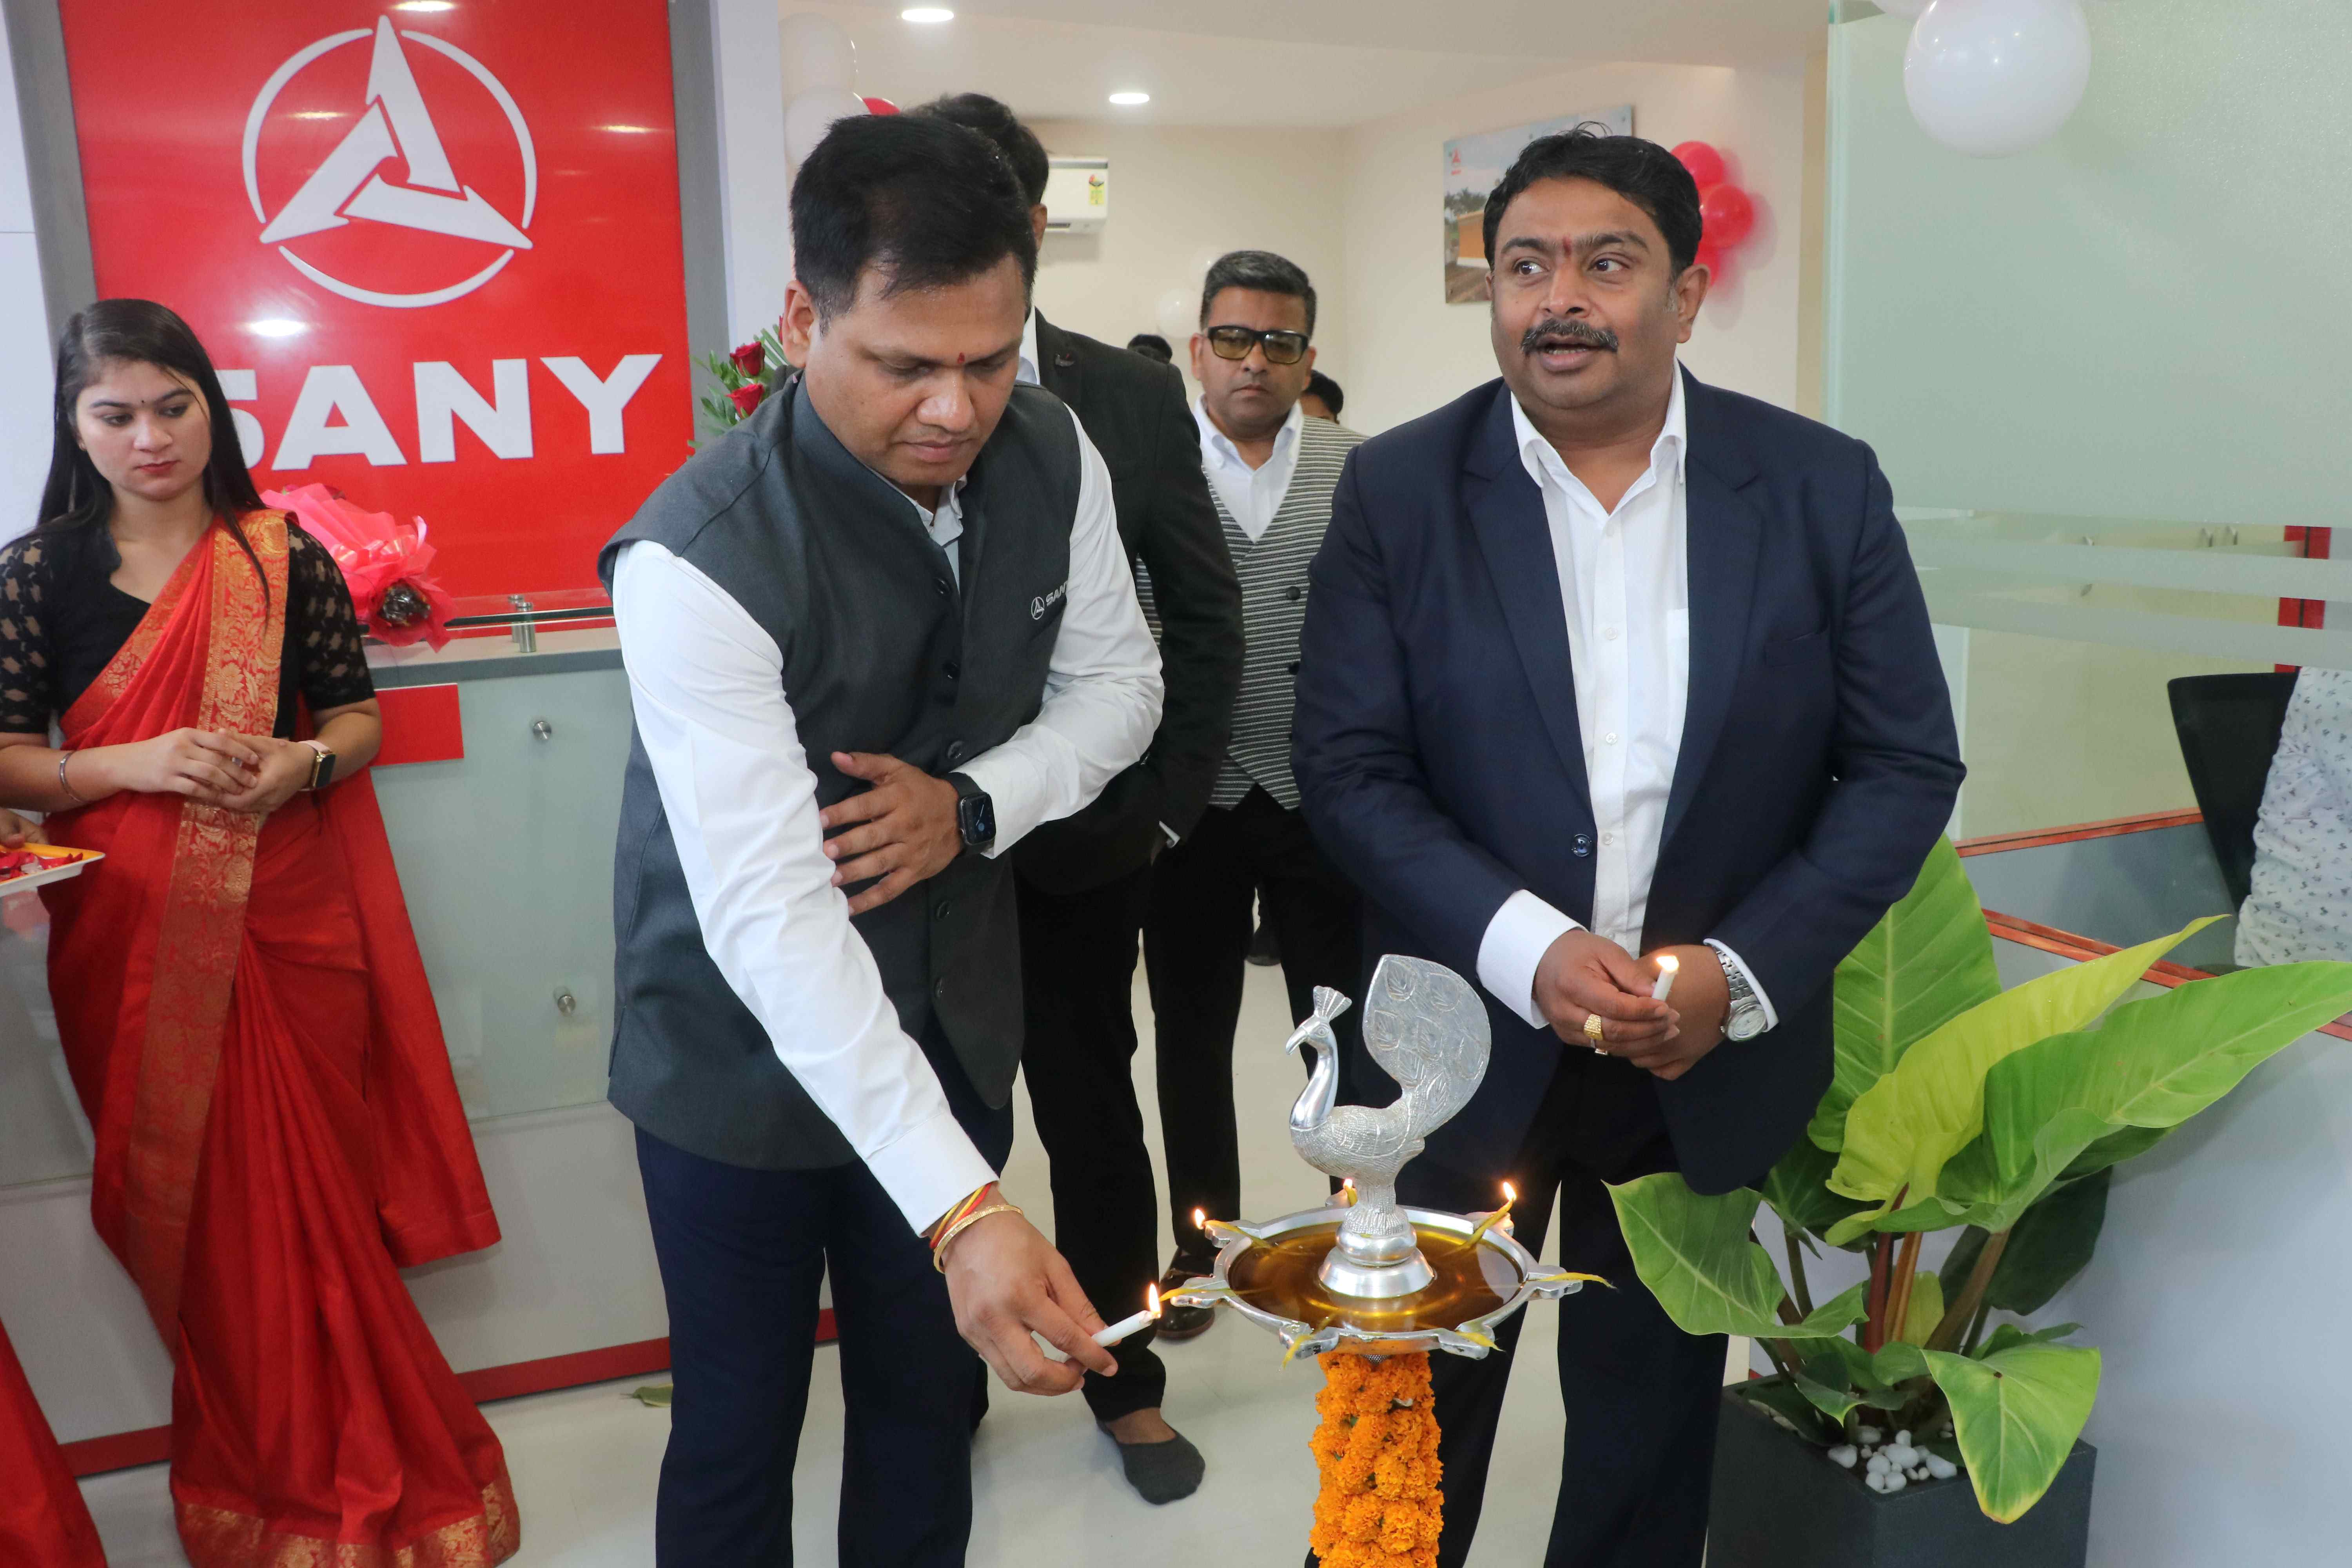 SANY India expands its network by adding a new dealership in Chhattisgarh decoding=